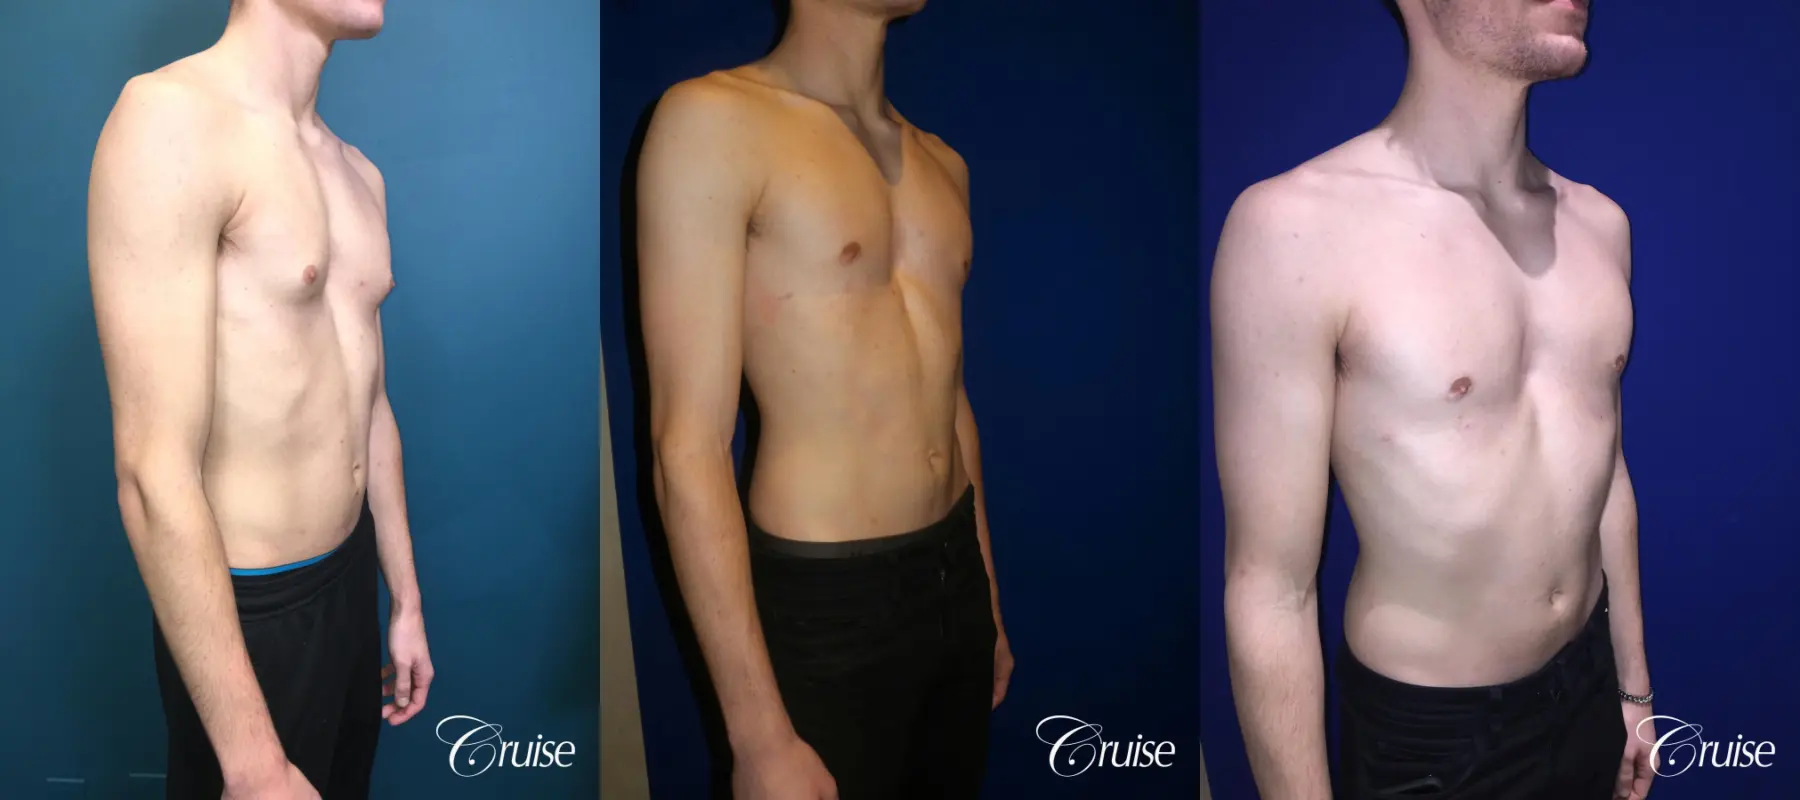 ALS - Body: Patient 1 - Before and After 2